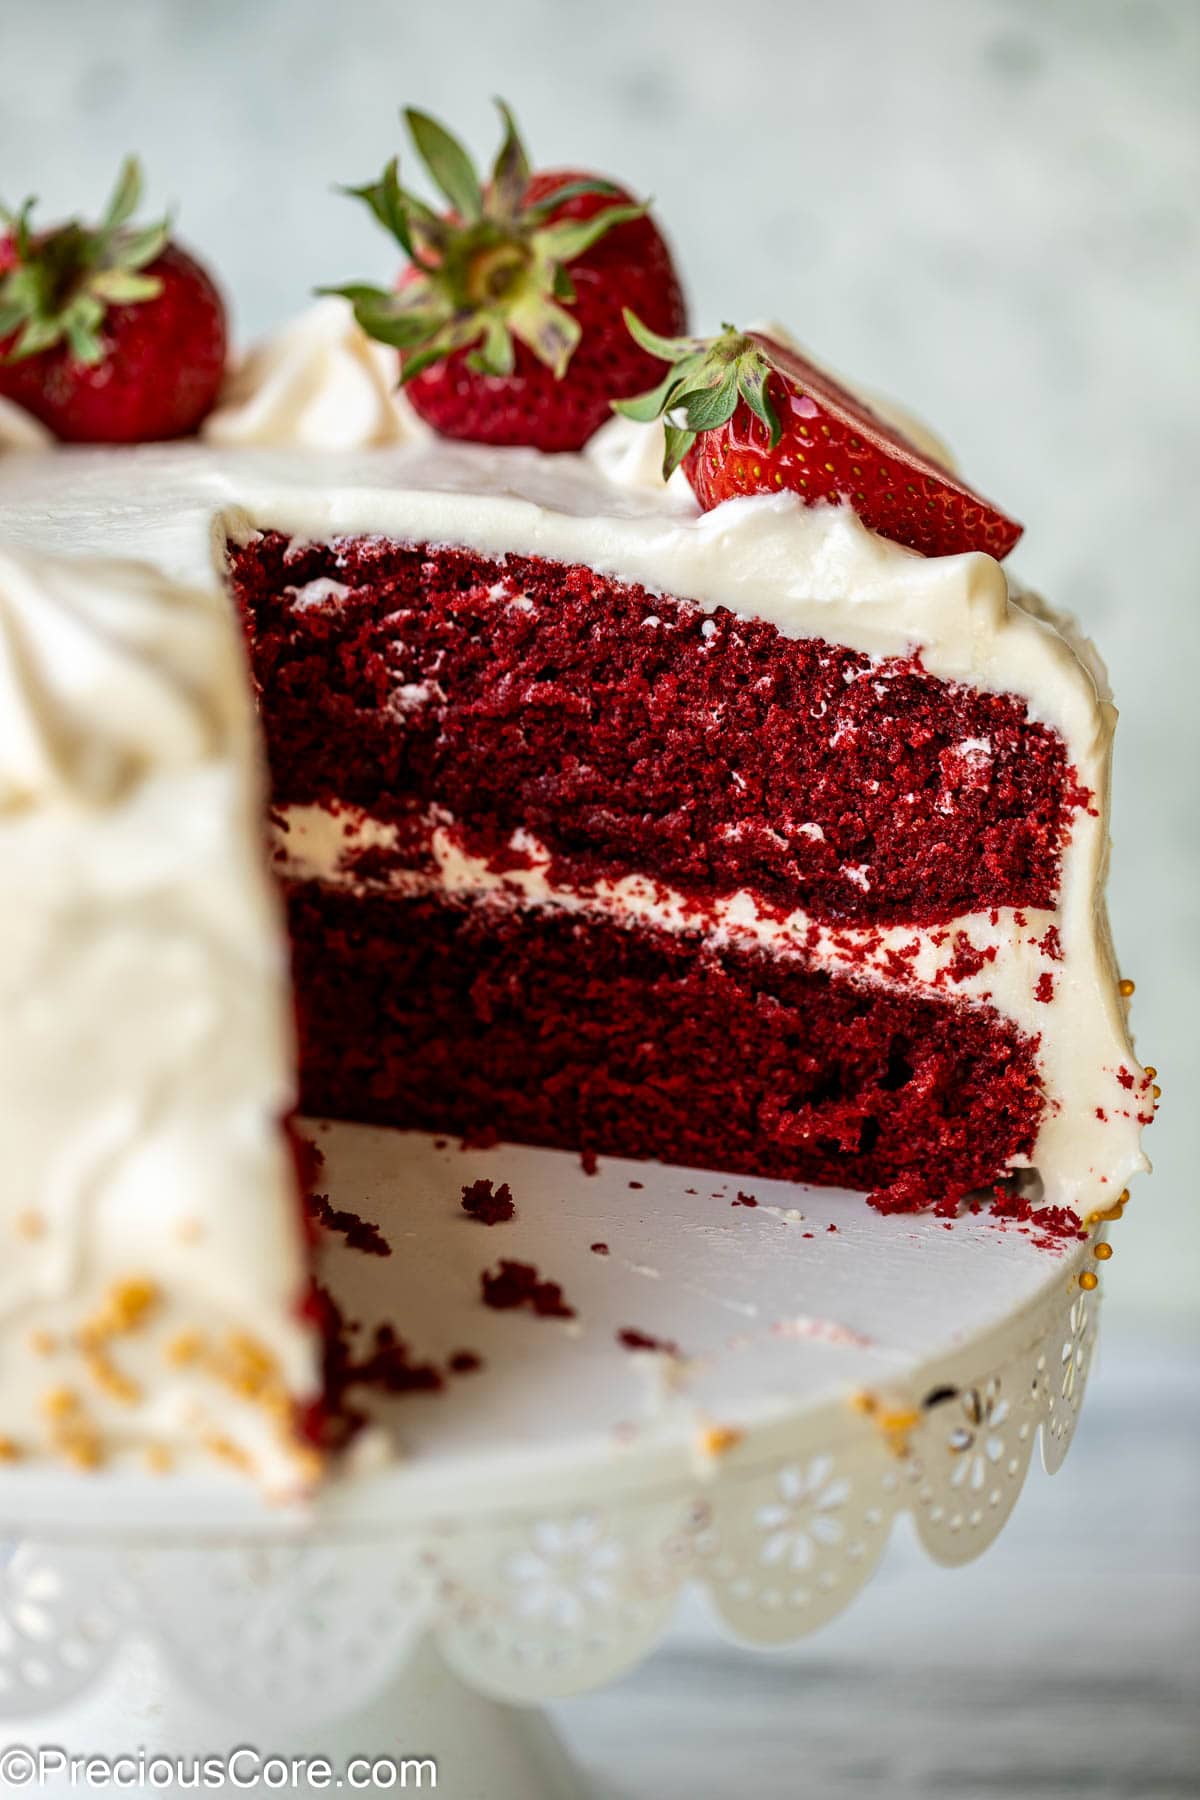 Cake cut open to show red velvet cake texture.